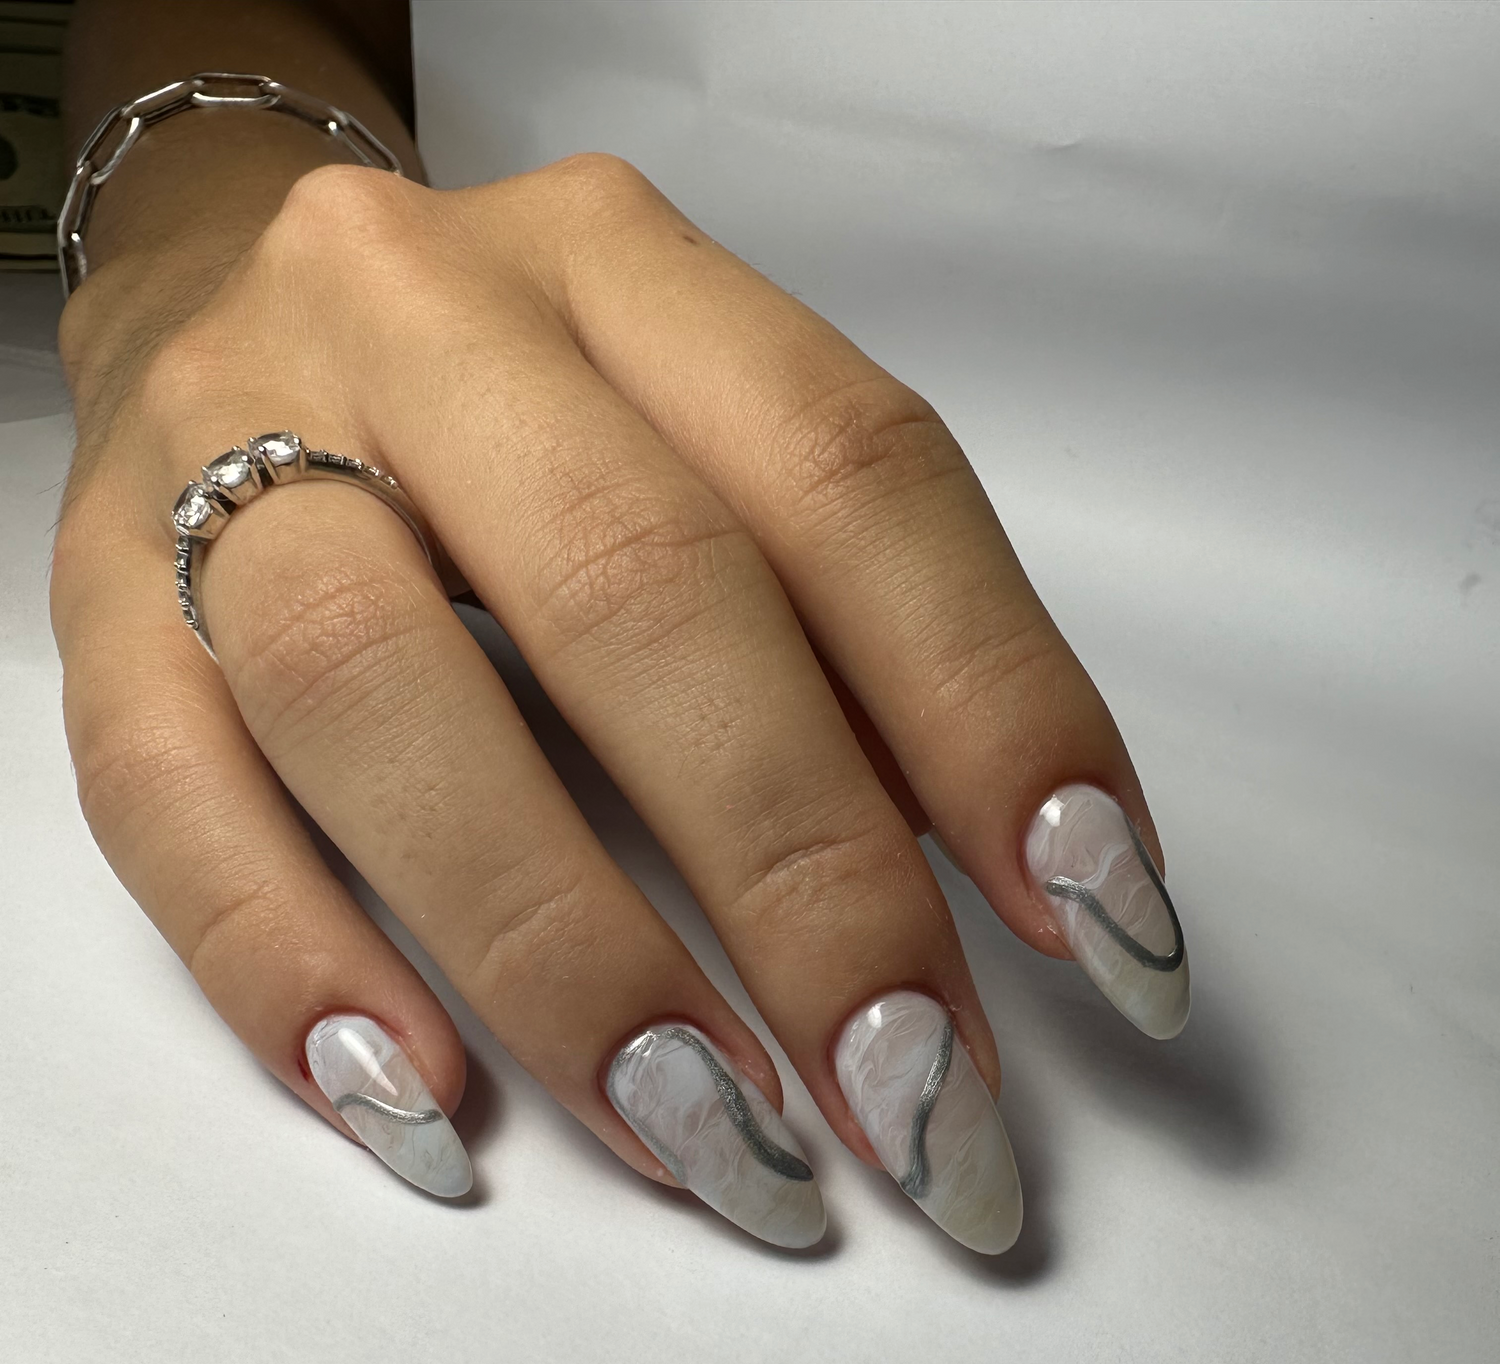 Almond Shaped Marbled Nails With Russian Manicure and Metallic Lines